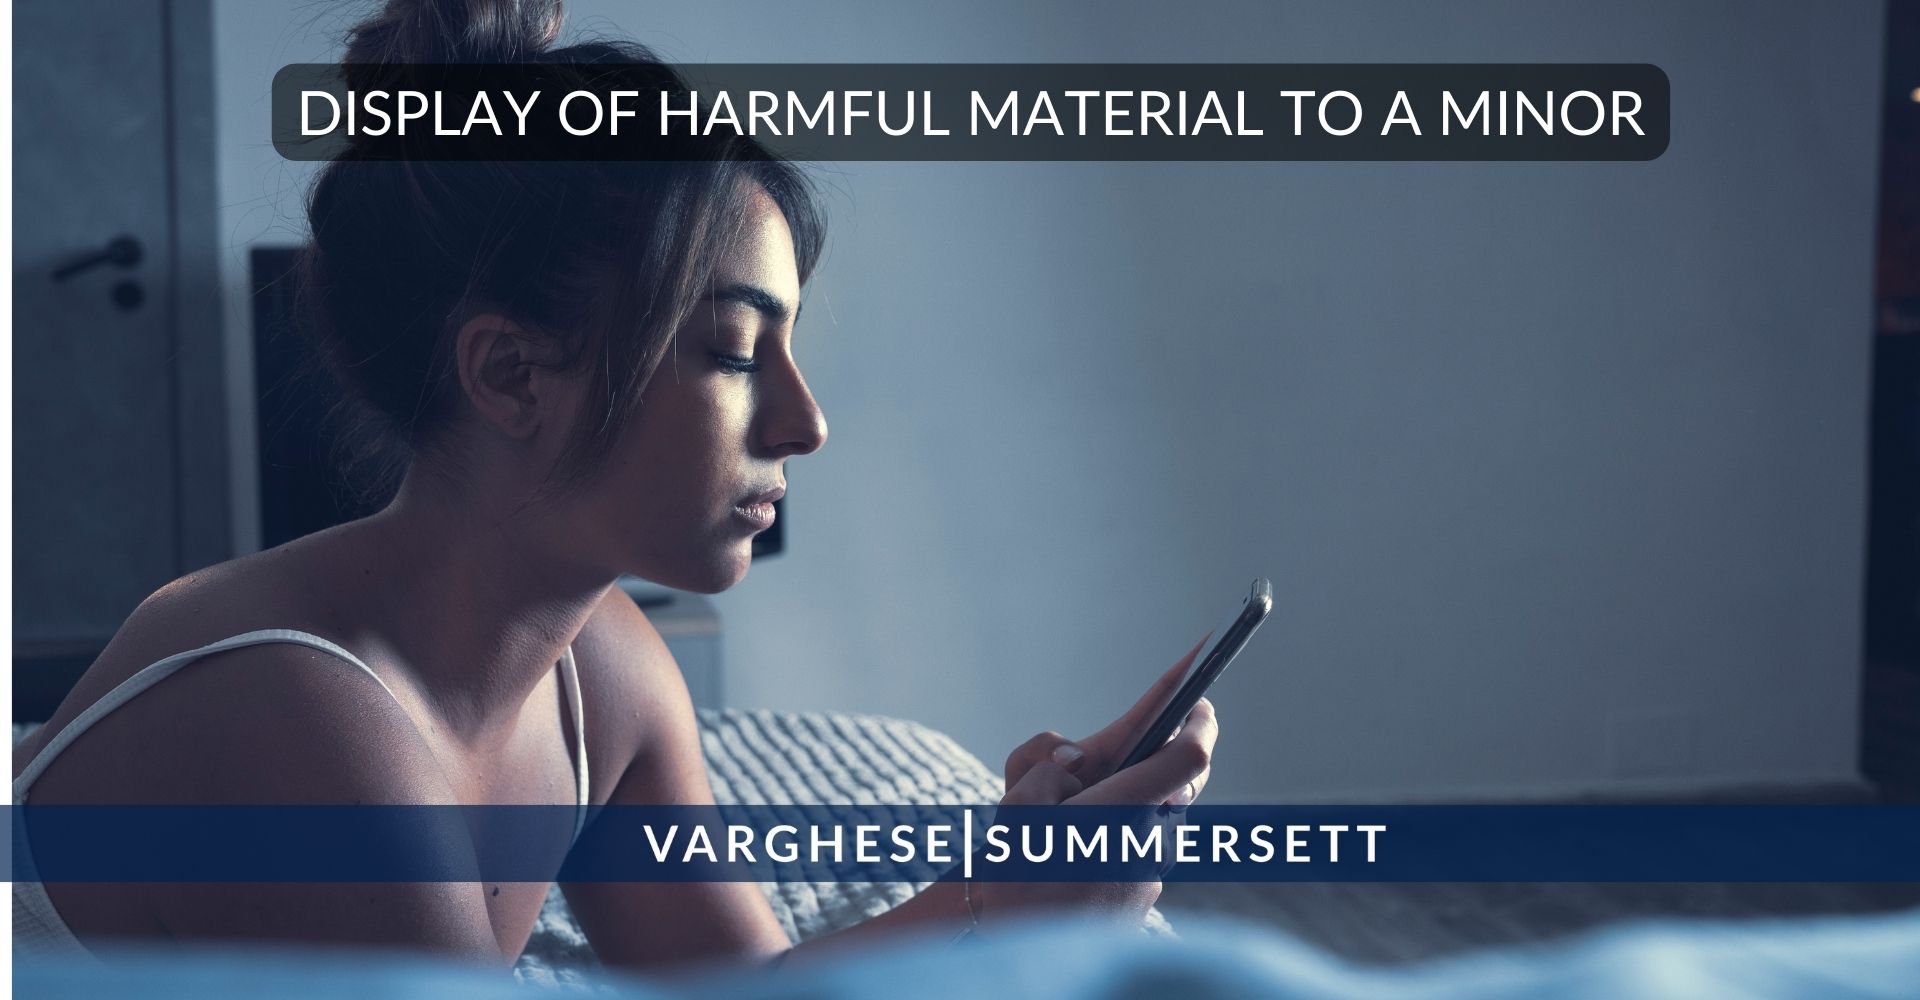 Sale, Distribution, or Display of Harmful Material to a Minor | Penal Code 43.24